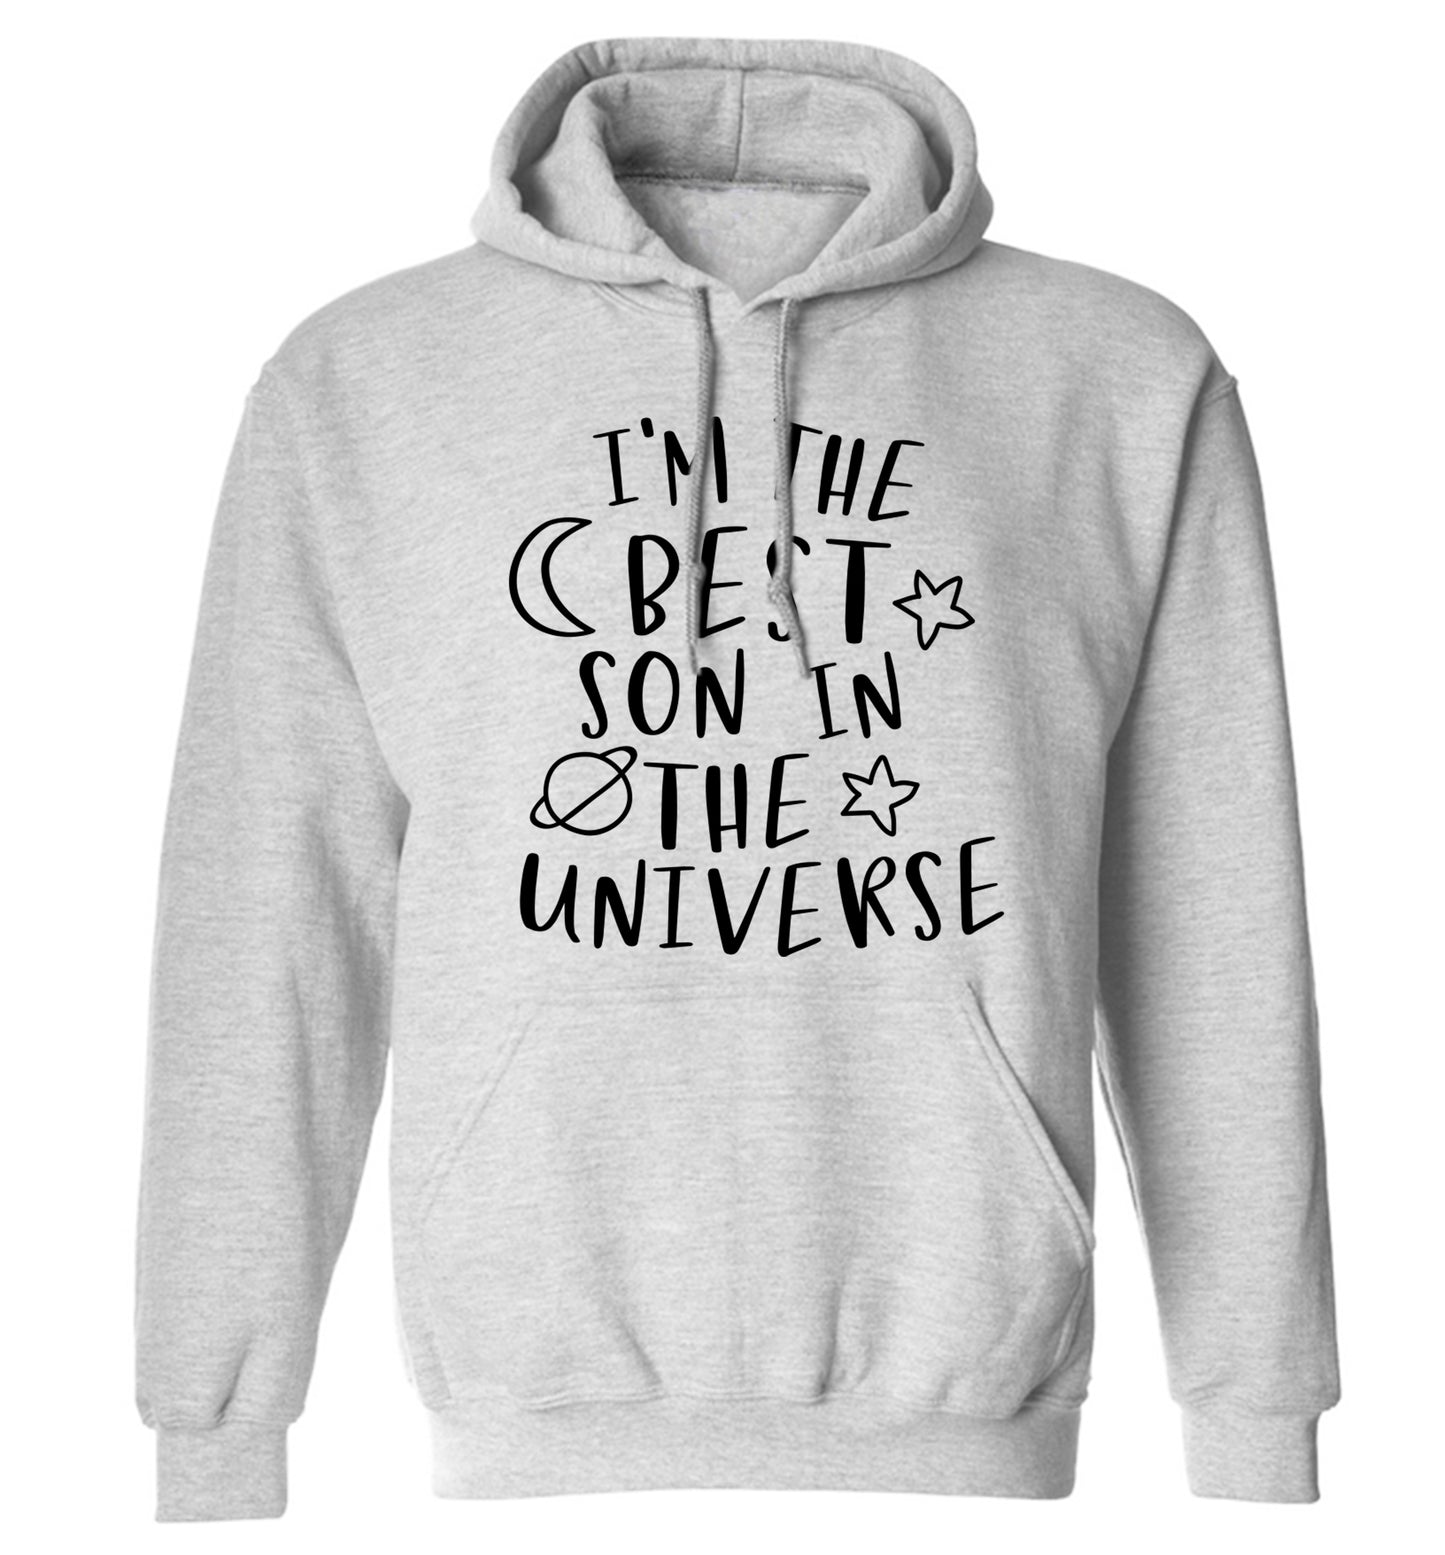 I'm the best son in the universe adults unisex grey hoodie 2XL